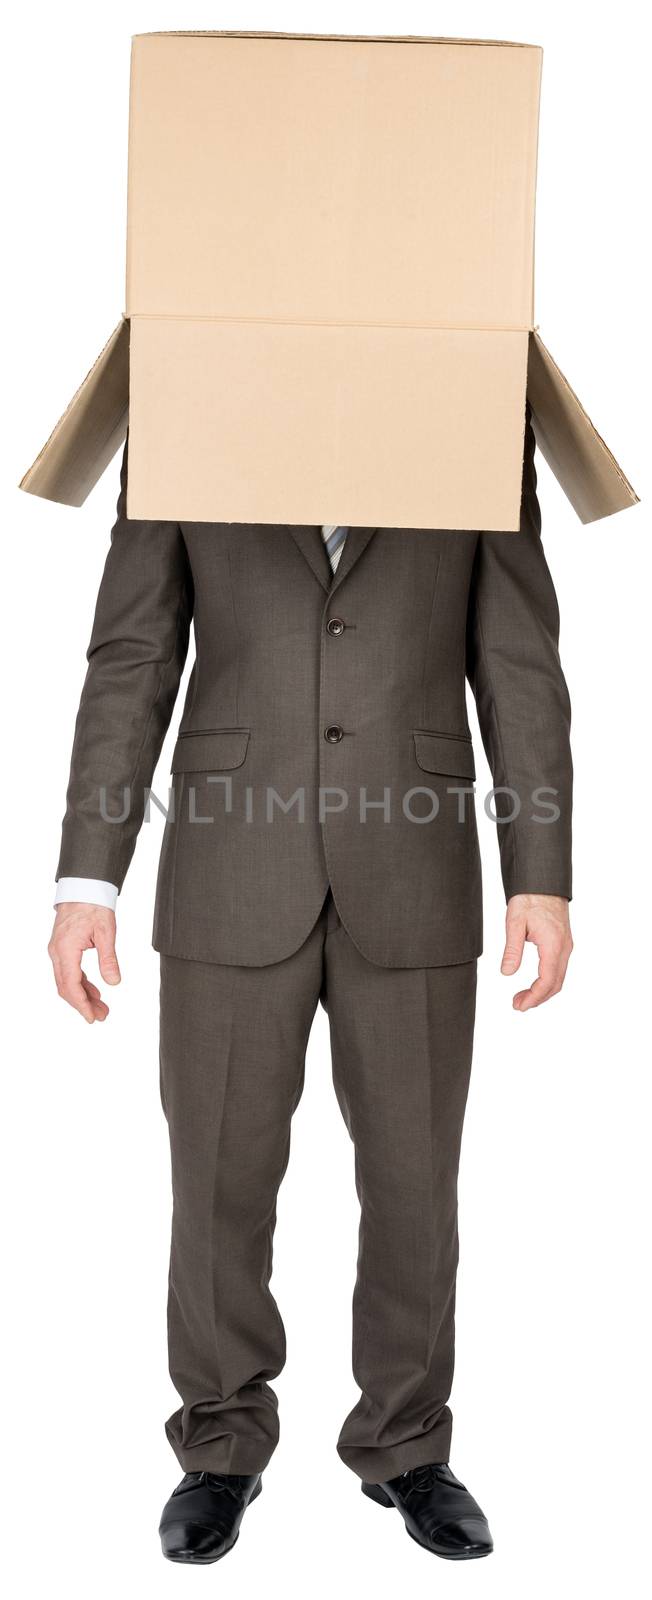 Businessman with brown box on his head, isolated on white background